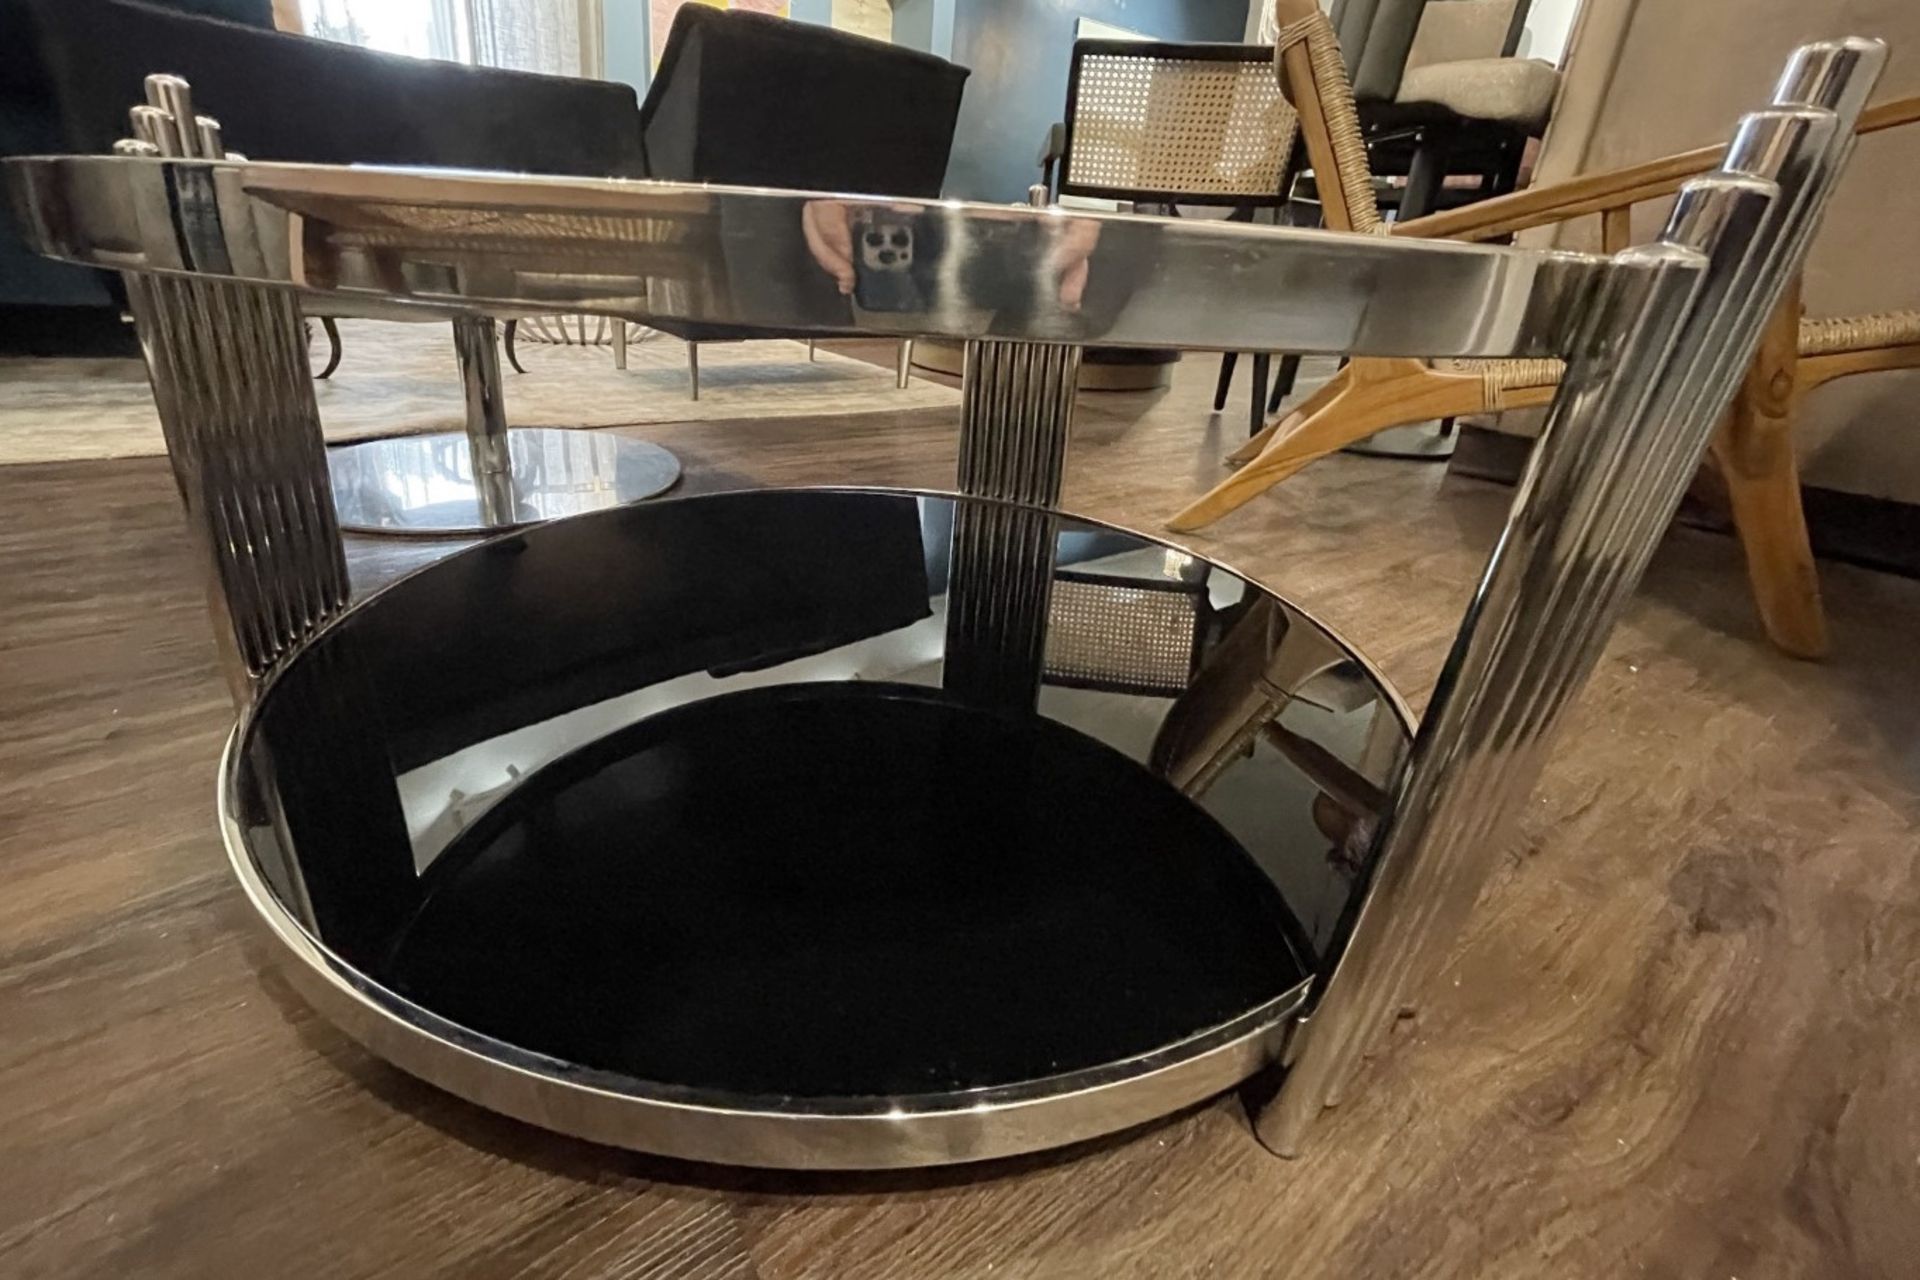 1 x Designer Opulent Black Glass Lined 2-Tier Coffee Table with a Metal Base and Pipe Decoration - Image 5 of 6